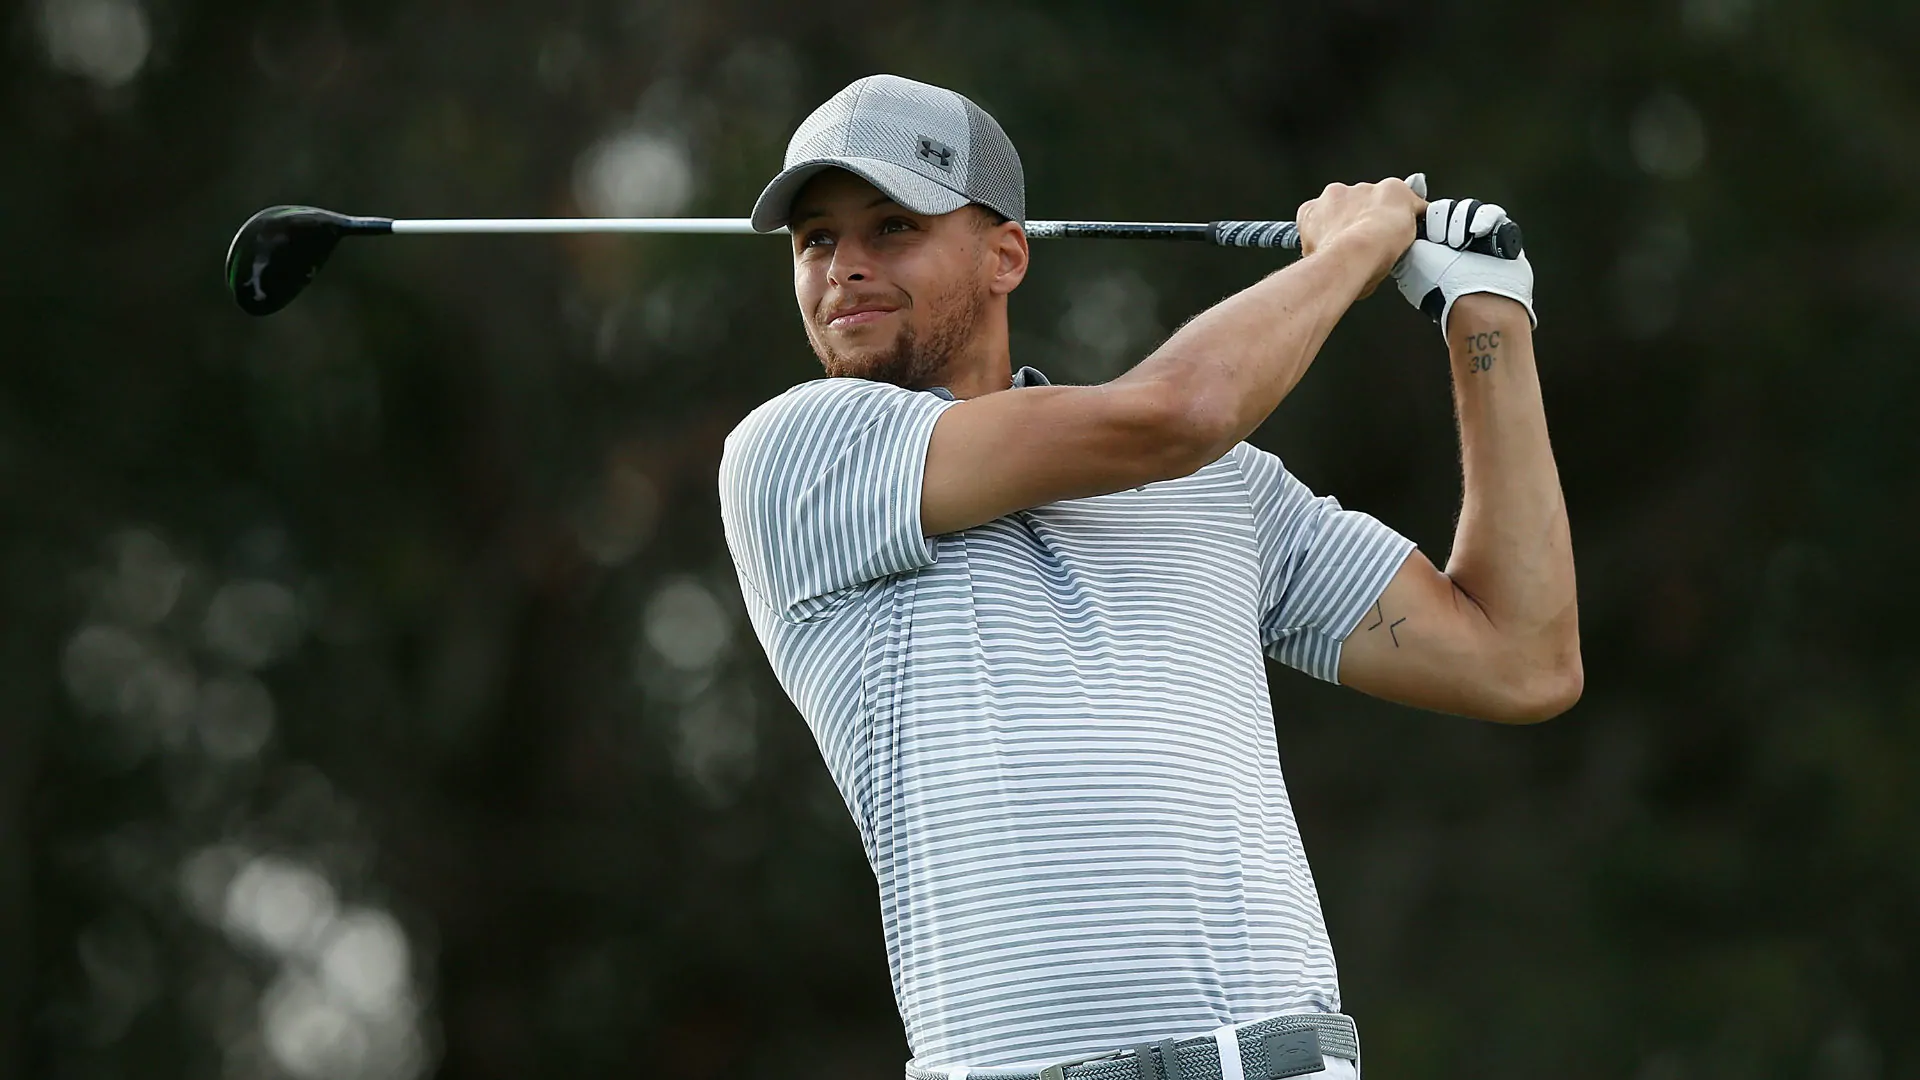 Report: Lake Merced in line for Curry-hosted Tour event